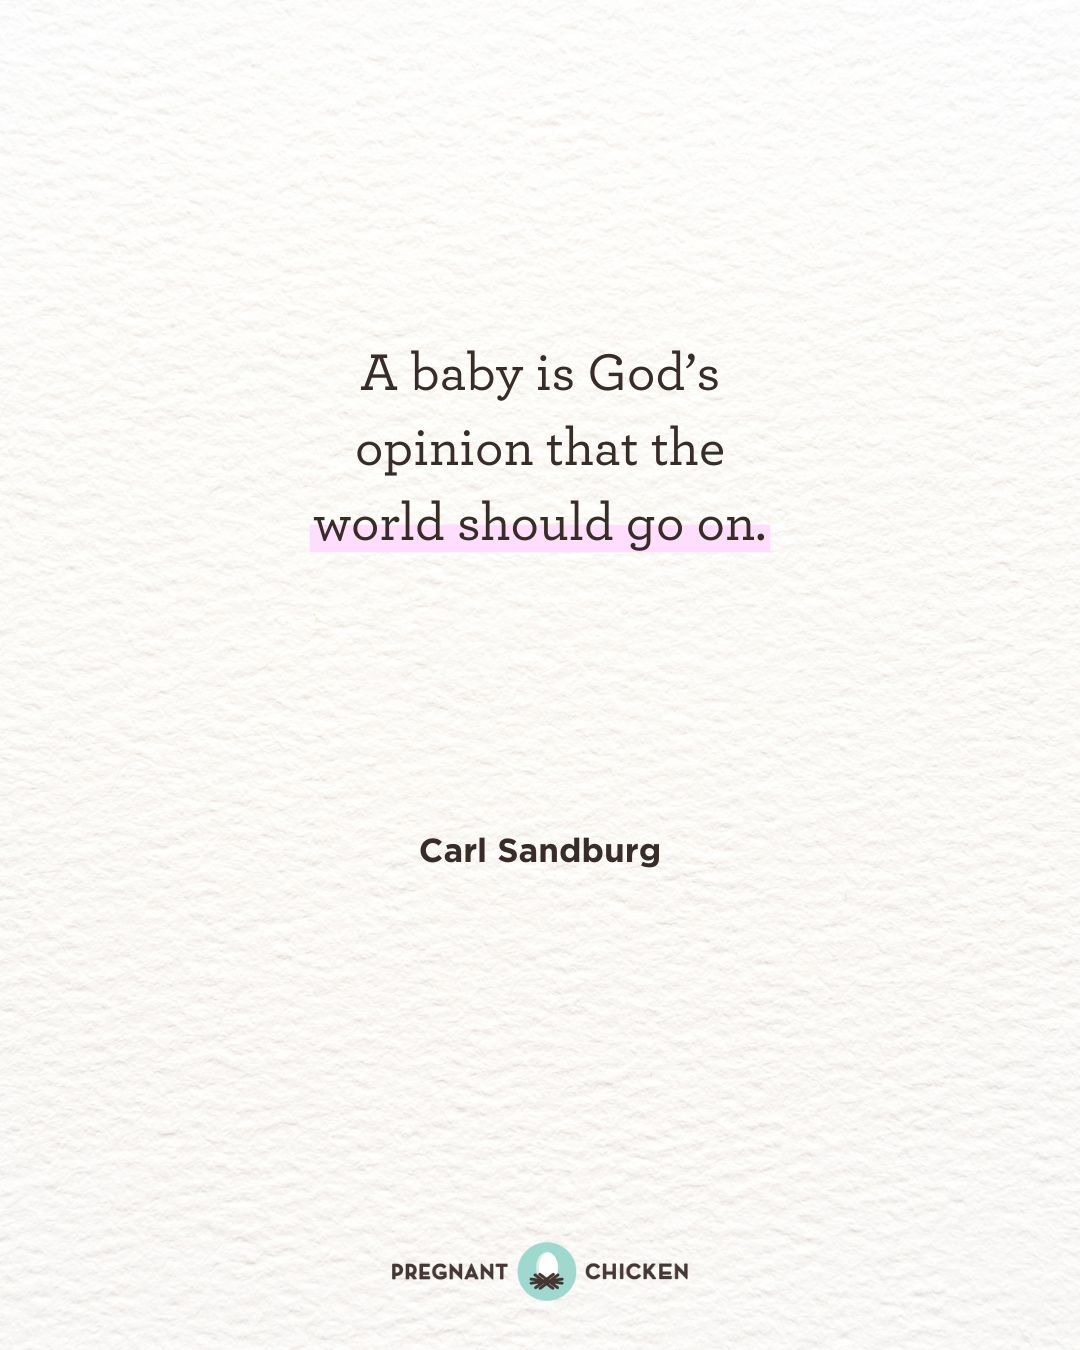 A baby is God’s opinion that the world should go on.